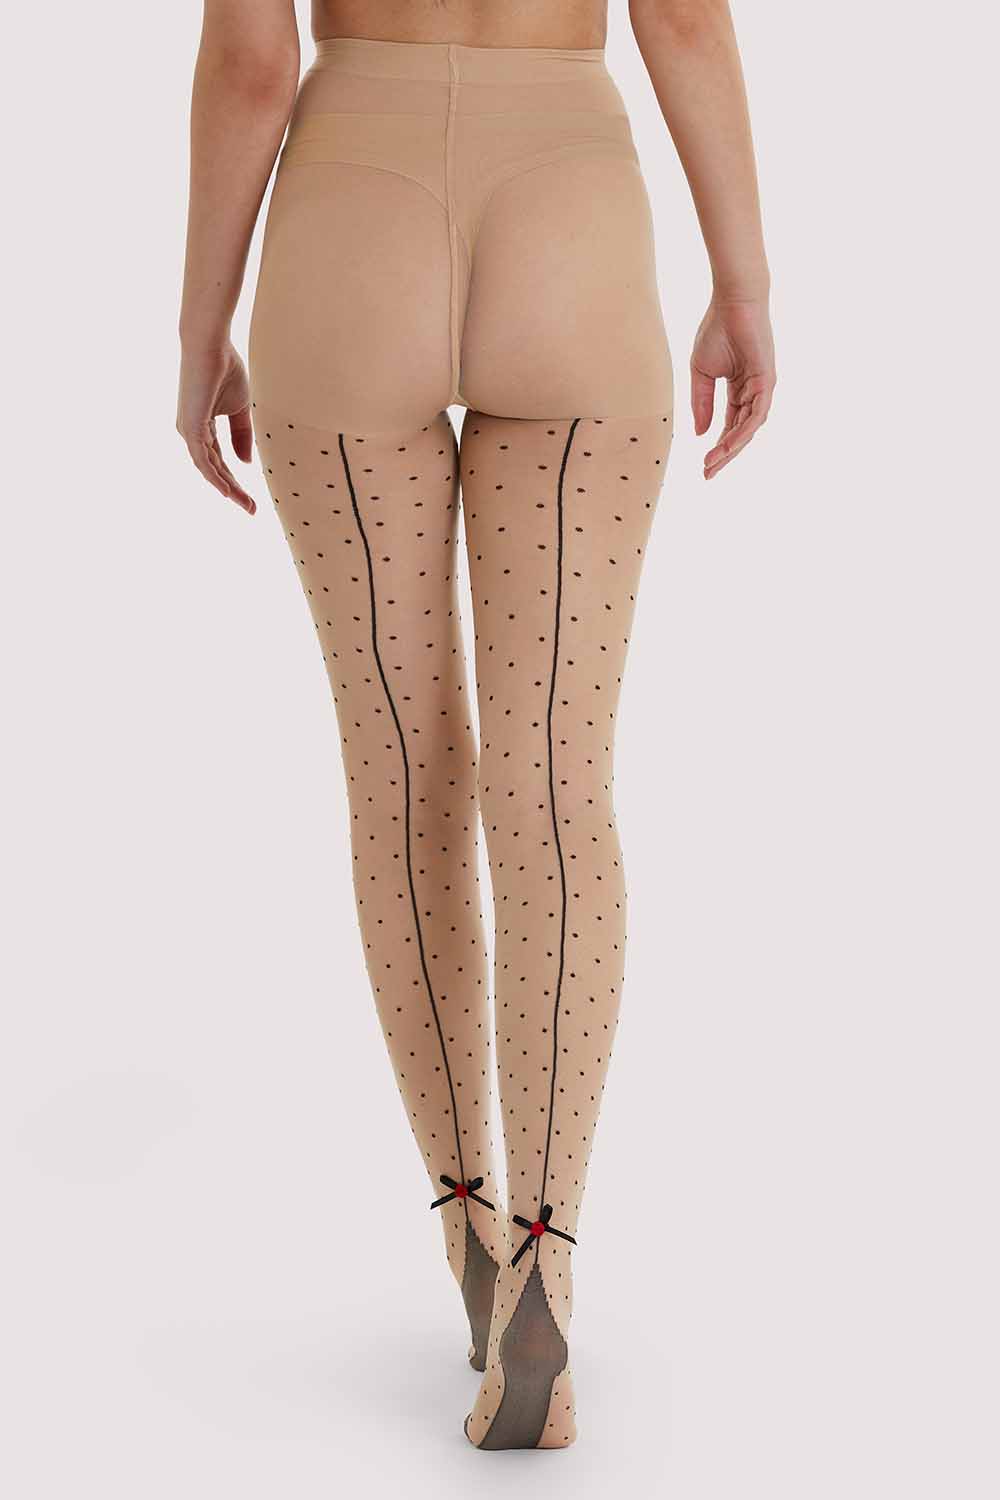 Nude With Back Seam - Beige Opaque Seamed Designer Pantyhose (Tights)